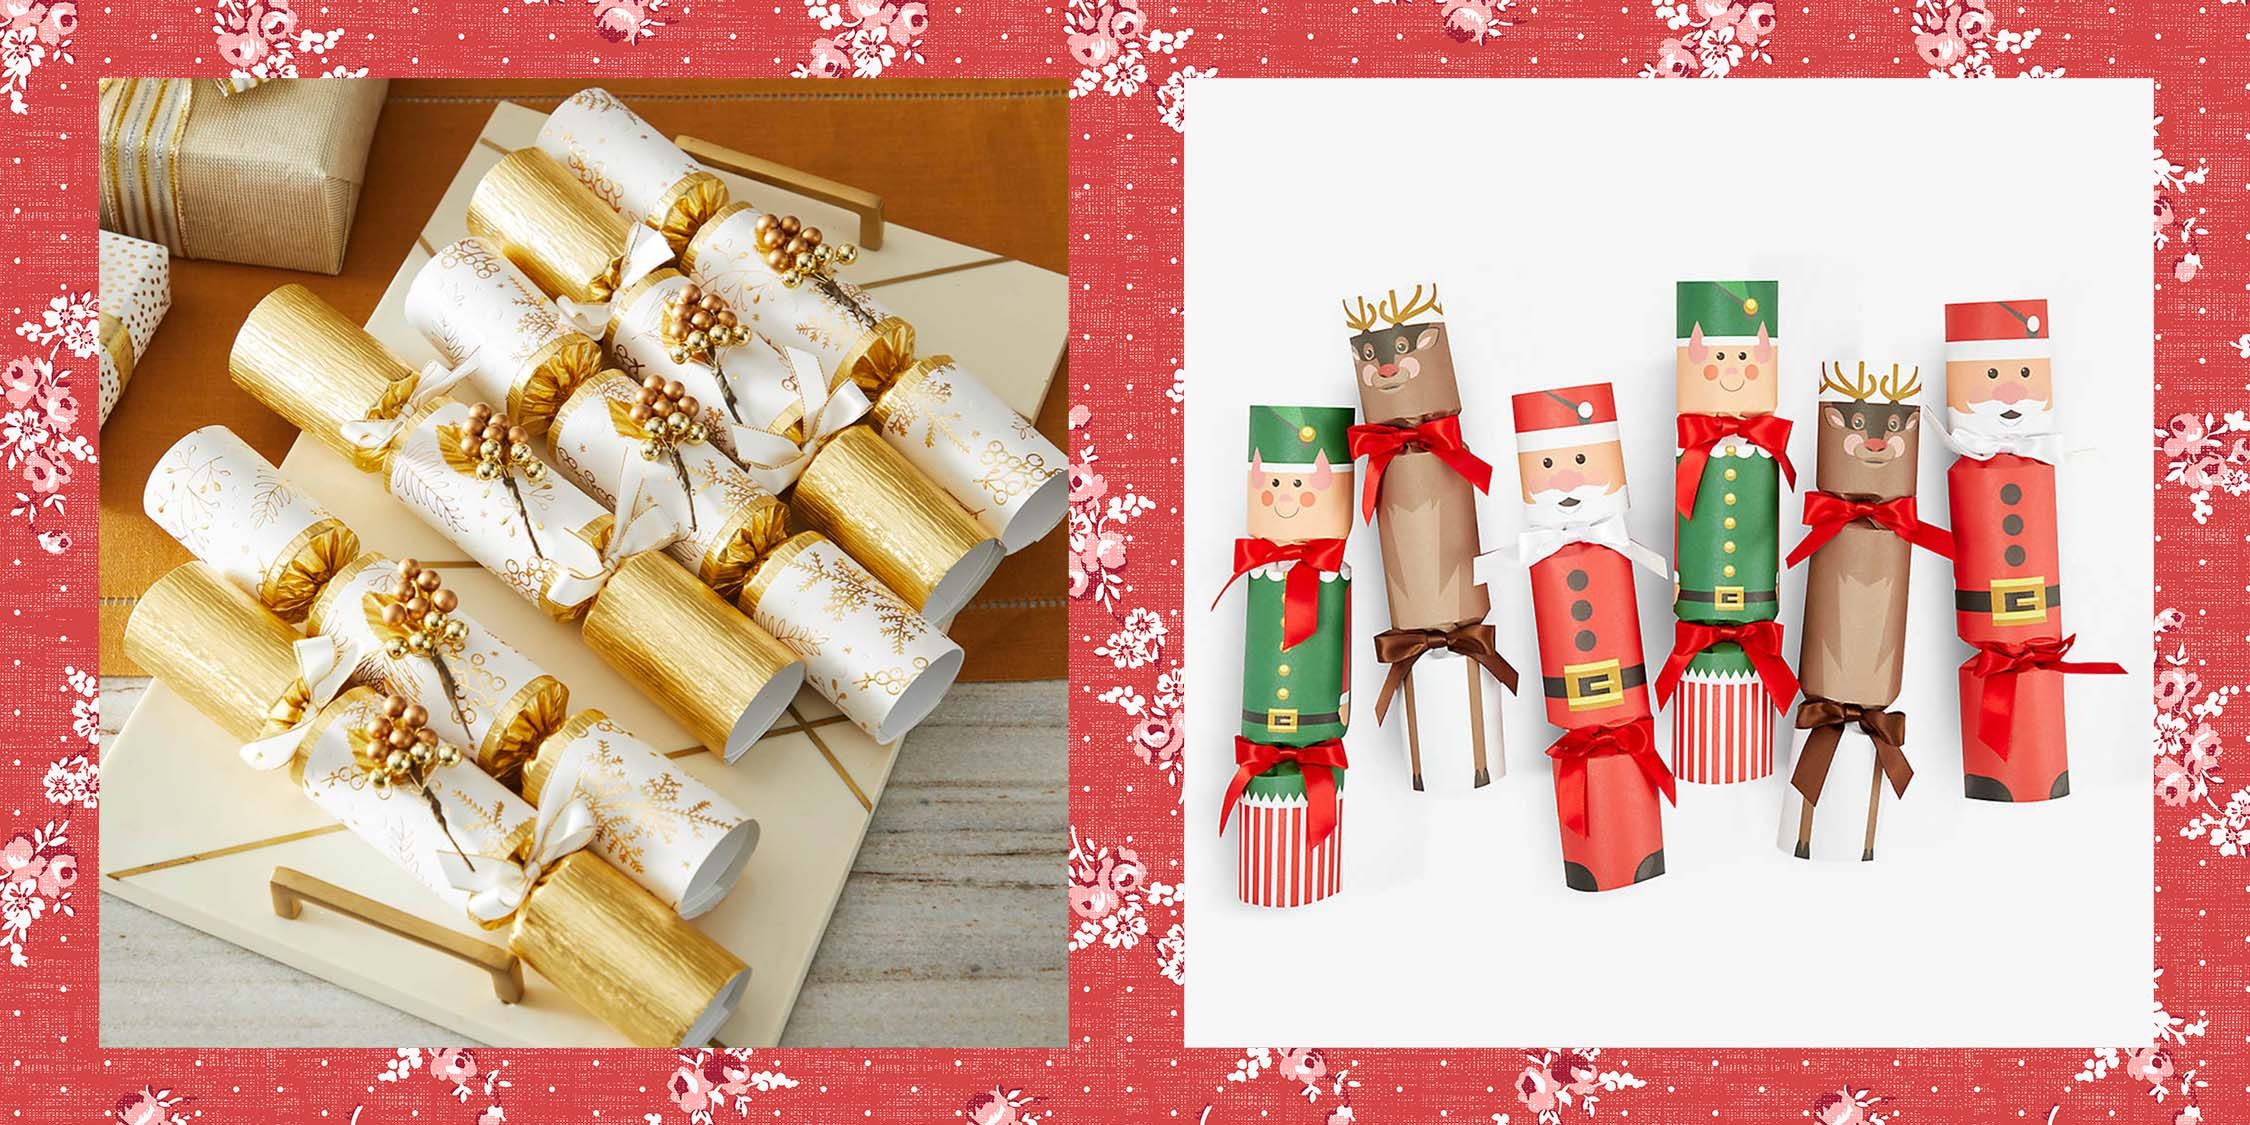 15 Best Luxury Christmas Crackers 2022 - Holiday Crackers